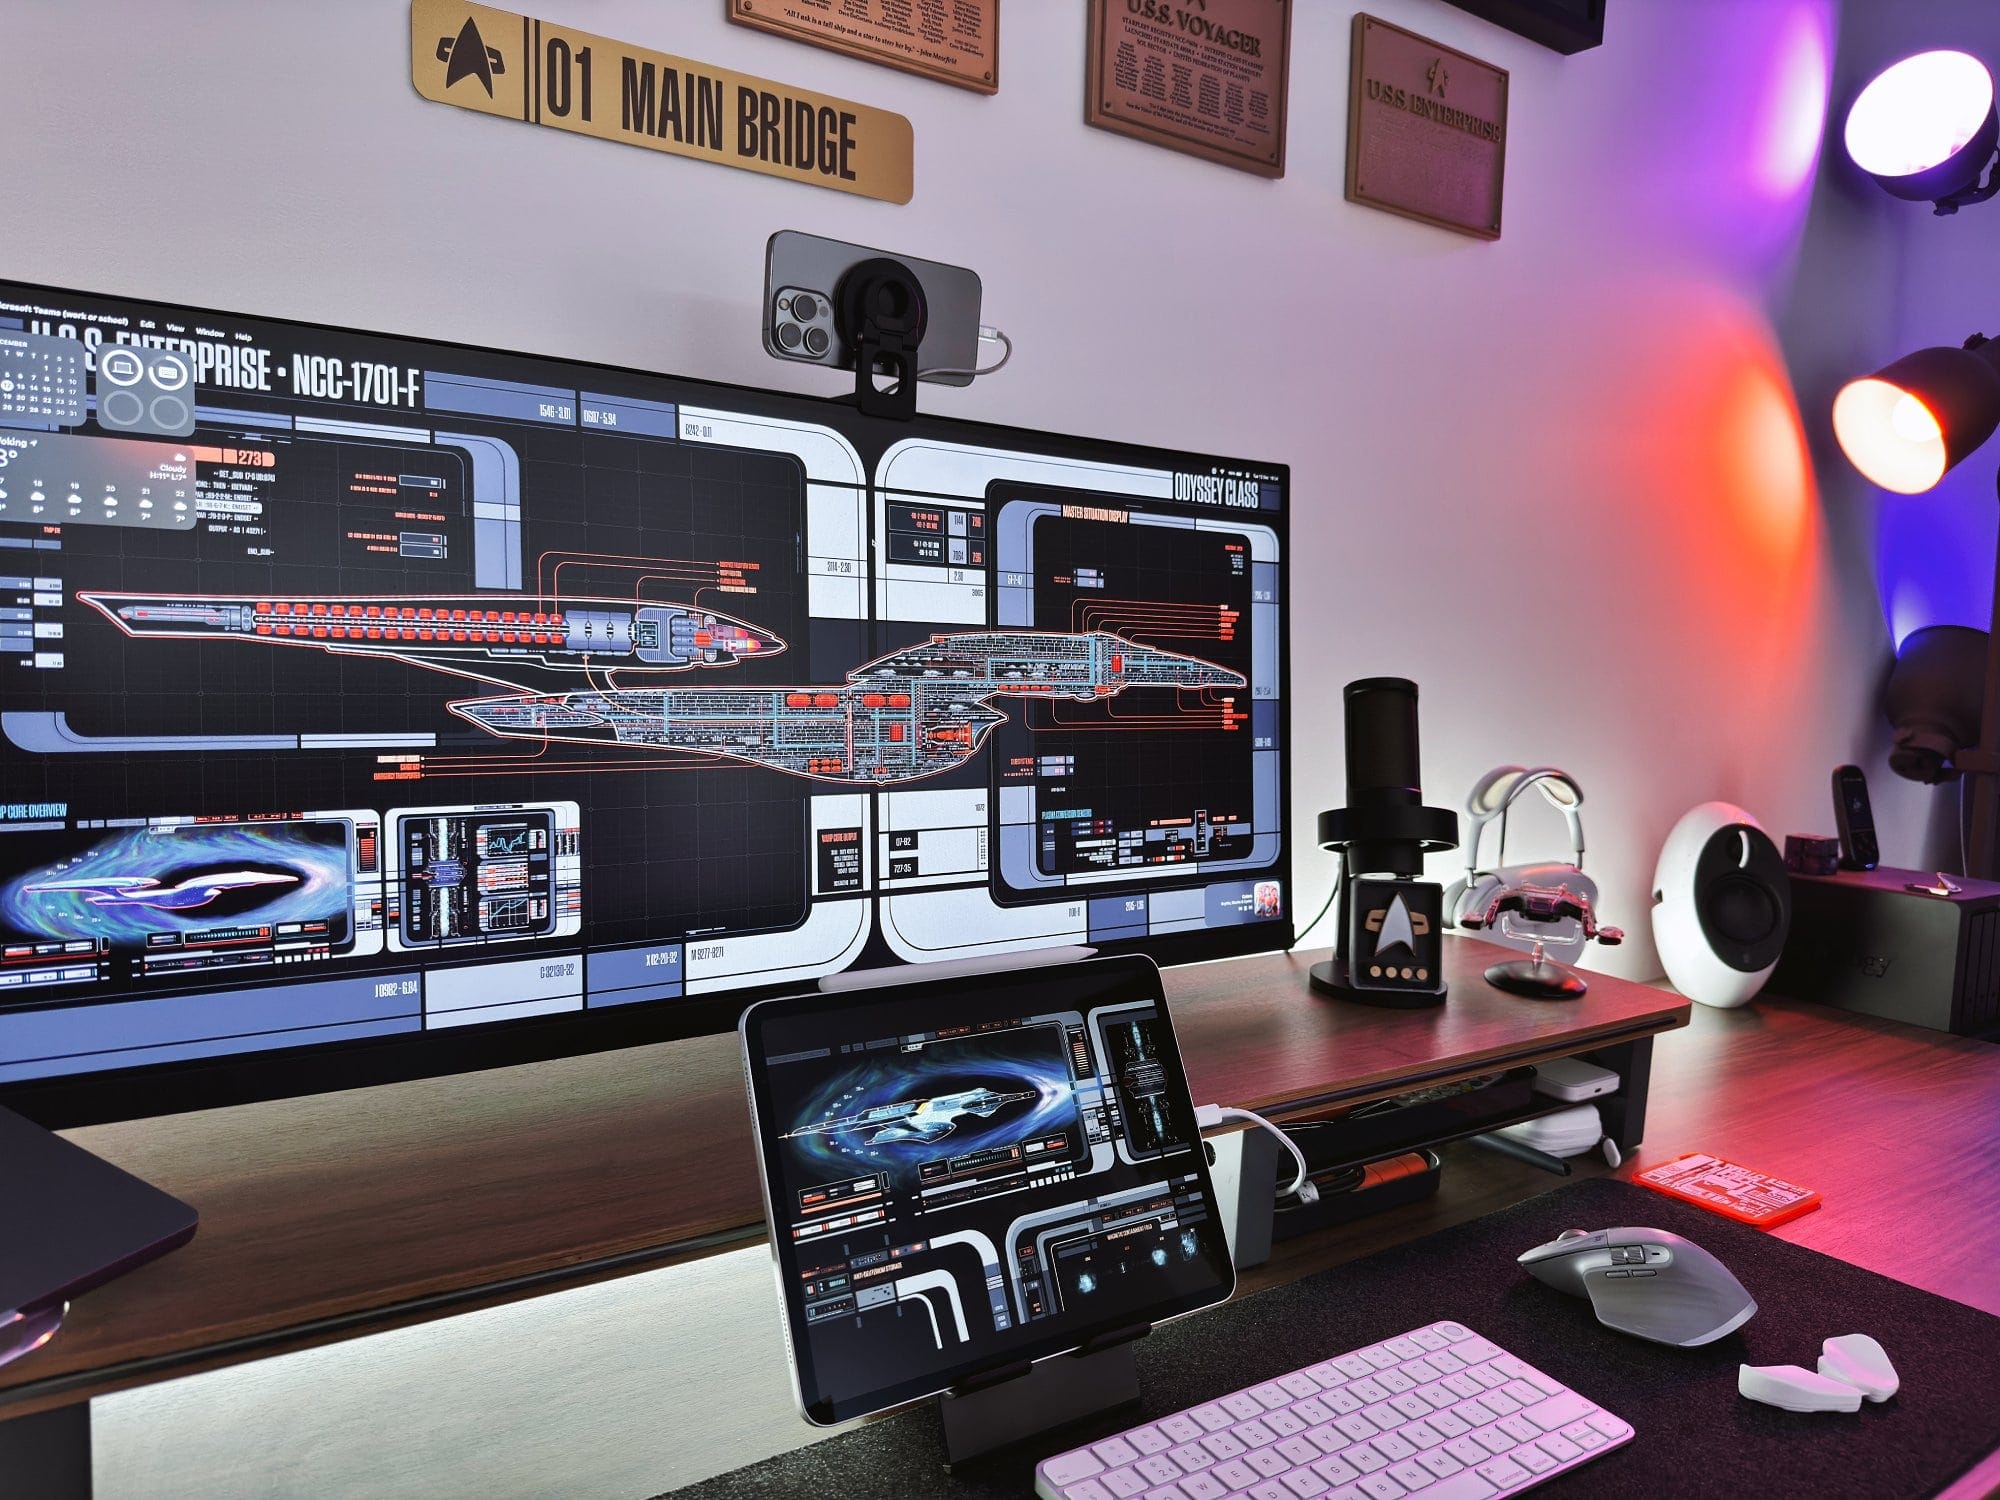 A high-tech desk setup with a multi-monitor display showing Star Trek interfaces, a tablet on a stand, ambient coloured lighting, and Star Trek memorabilia on the wall